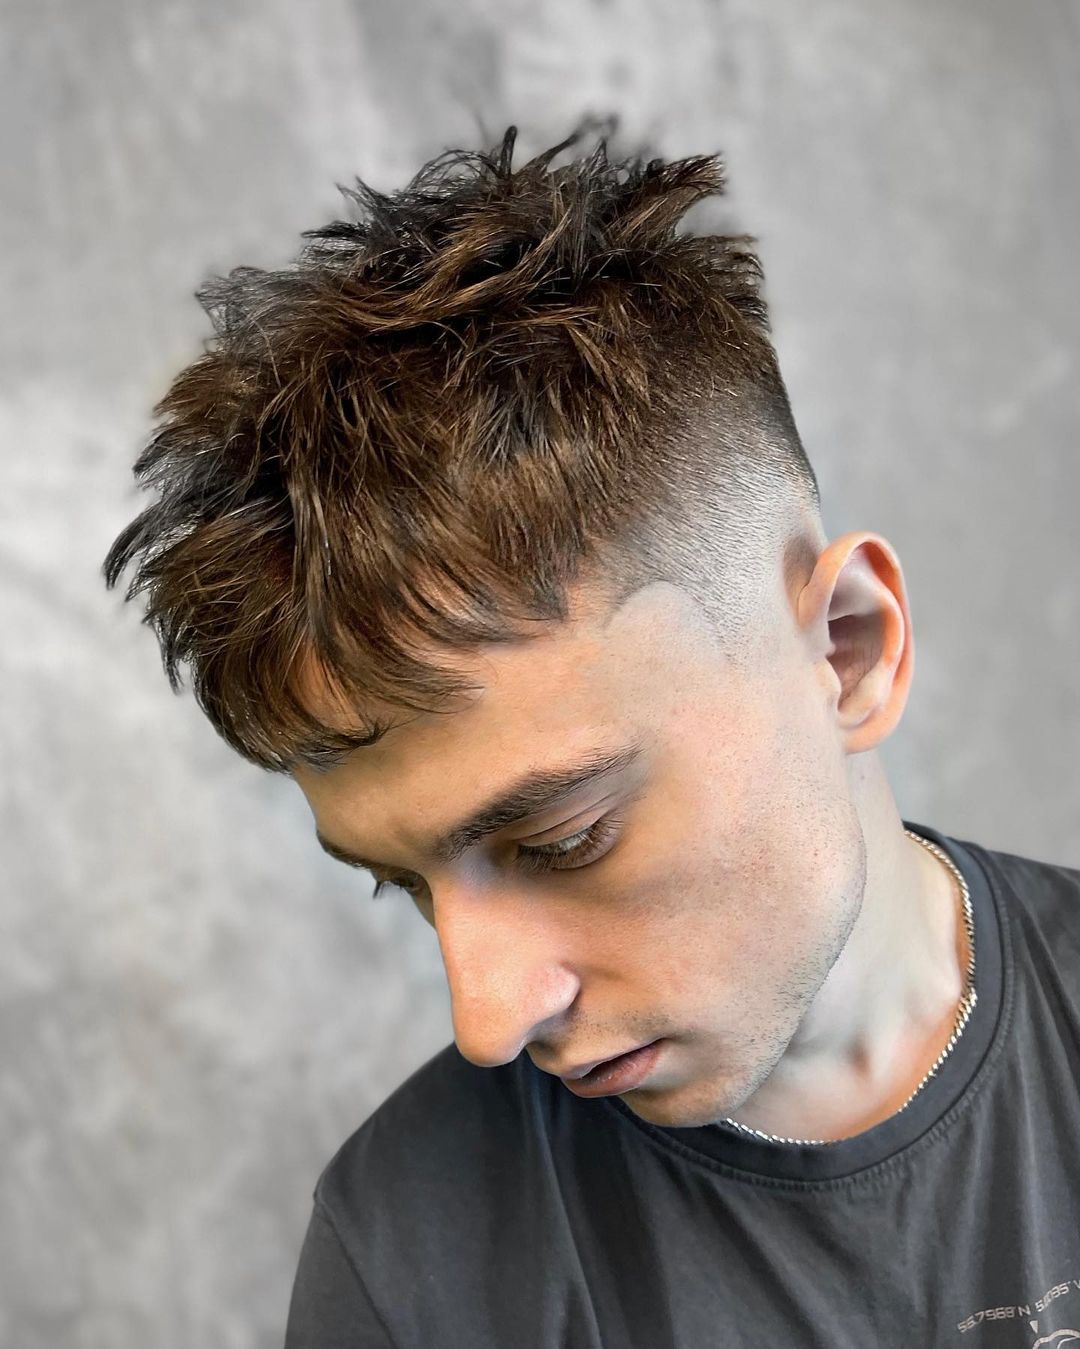 Messy hairstyle for Men 99 Medium messy hairstyles for guys | Messy fade haircut | Messy hairstyles for medium hair Messy hairstyles for Men